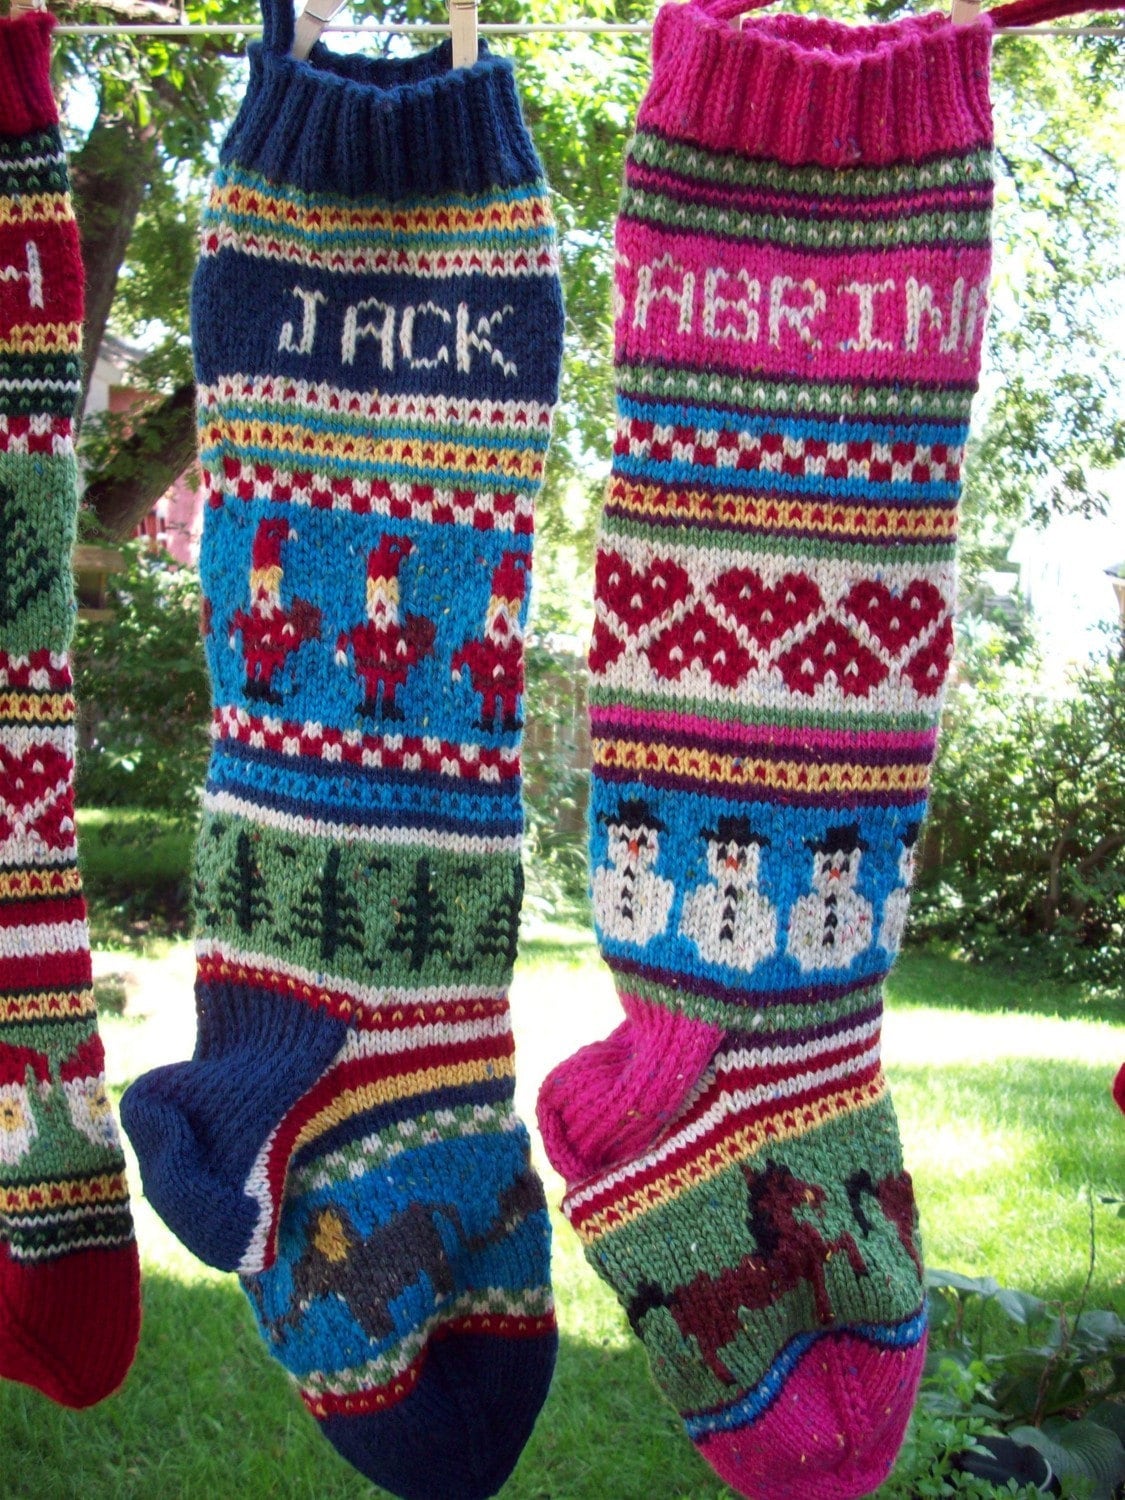 Personalized Hand Knitted Fair Isle Christmas Stocking for